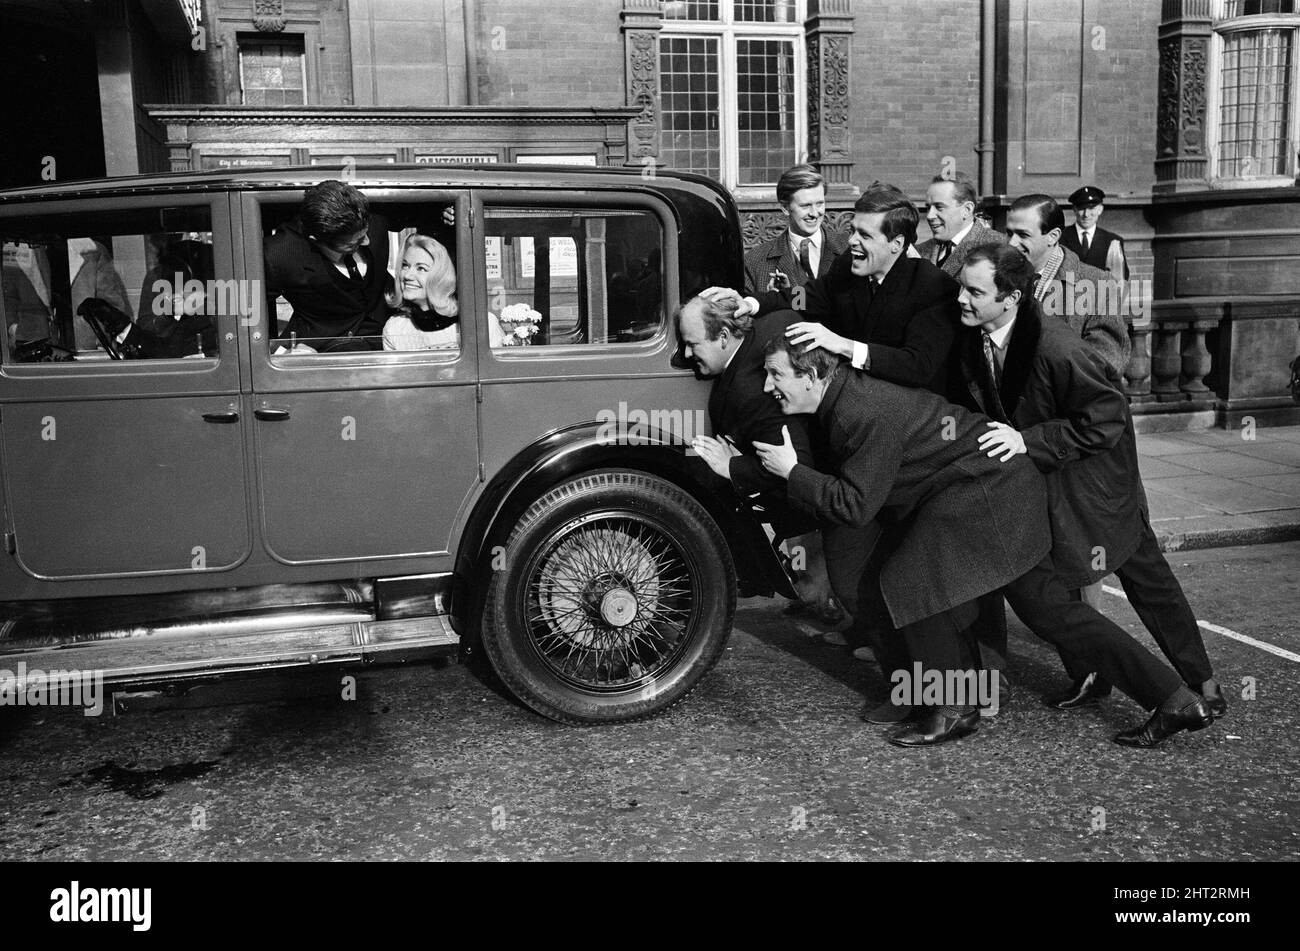 The wedding of Al Mancini and Denny Dayviss at Caxton Hall, London. The eight best men queue to kiss the bride. The bridge and groom are pictured in a 1924 Rolls Royce saloon with the eight best men, Lance Percival, Jack Duncan, Frank Dux, Kenneth Cope, Roy Kinnear, William Rushton, Ronnie Carroll and Ned Sherrin, giving it a push. 23rd November 1965. Stock Photo